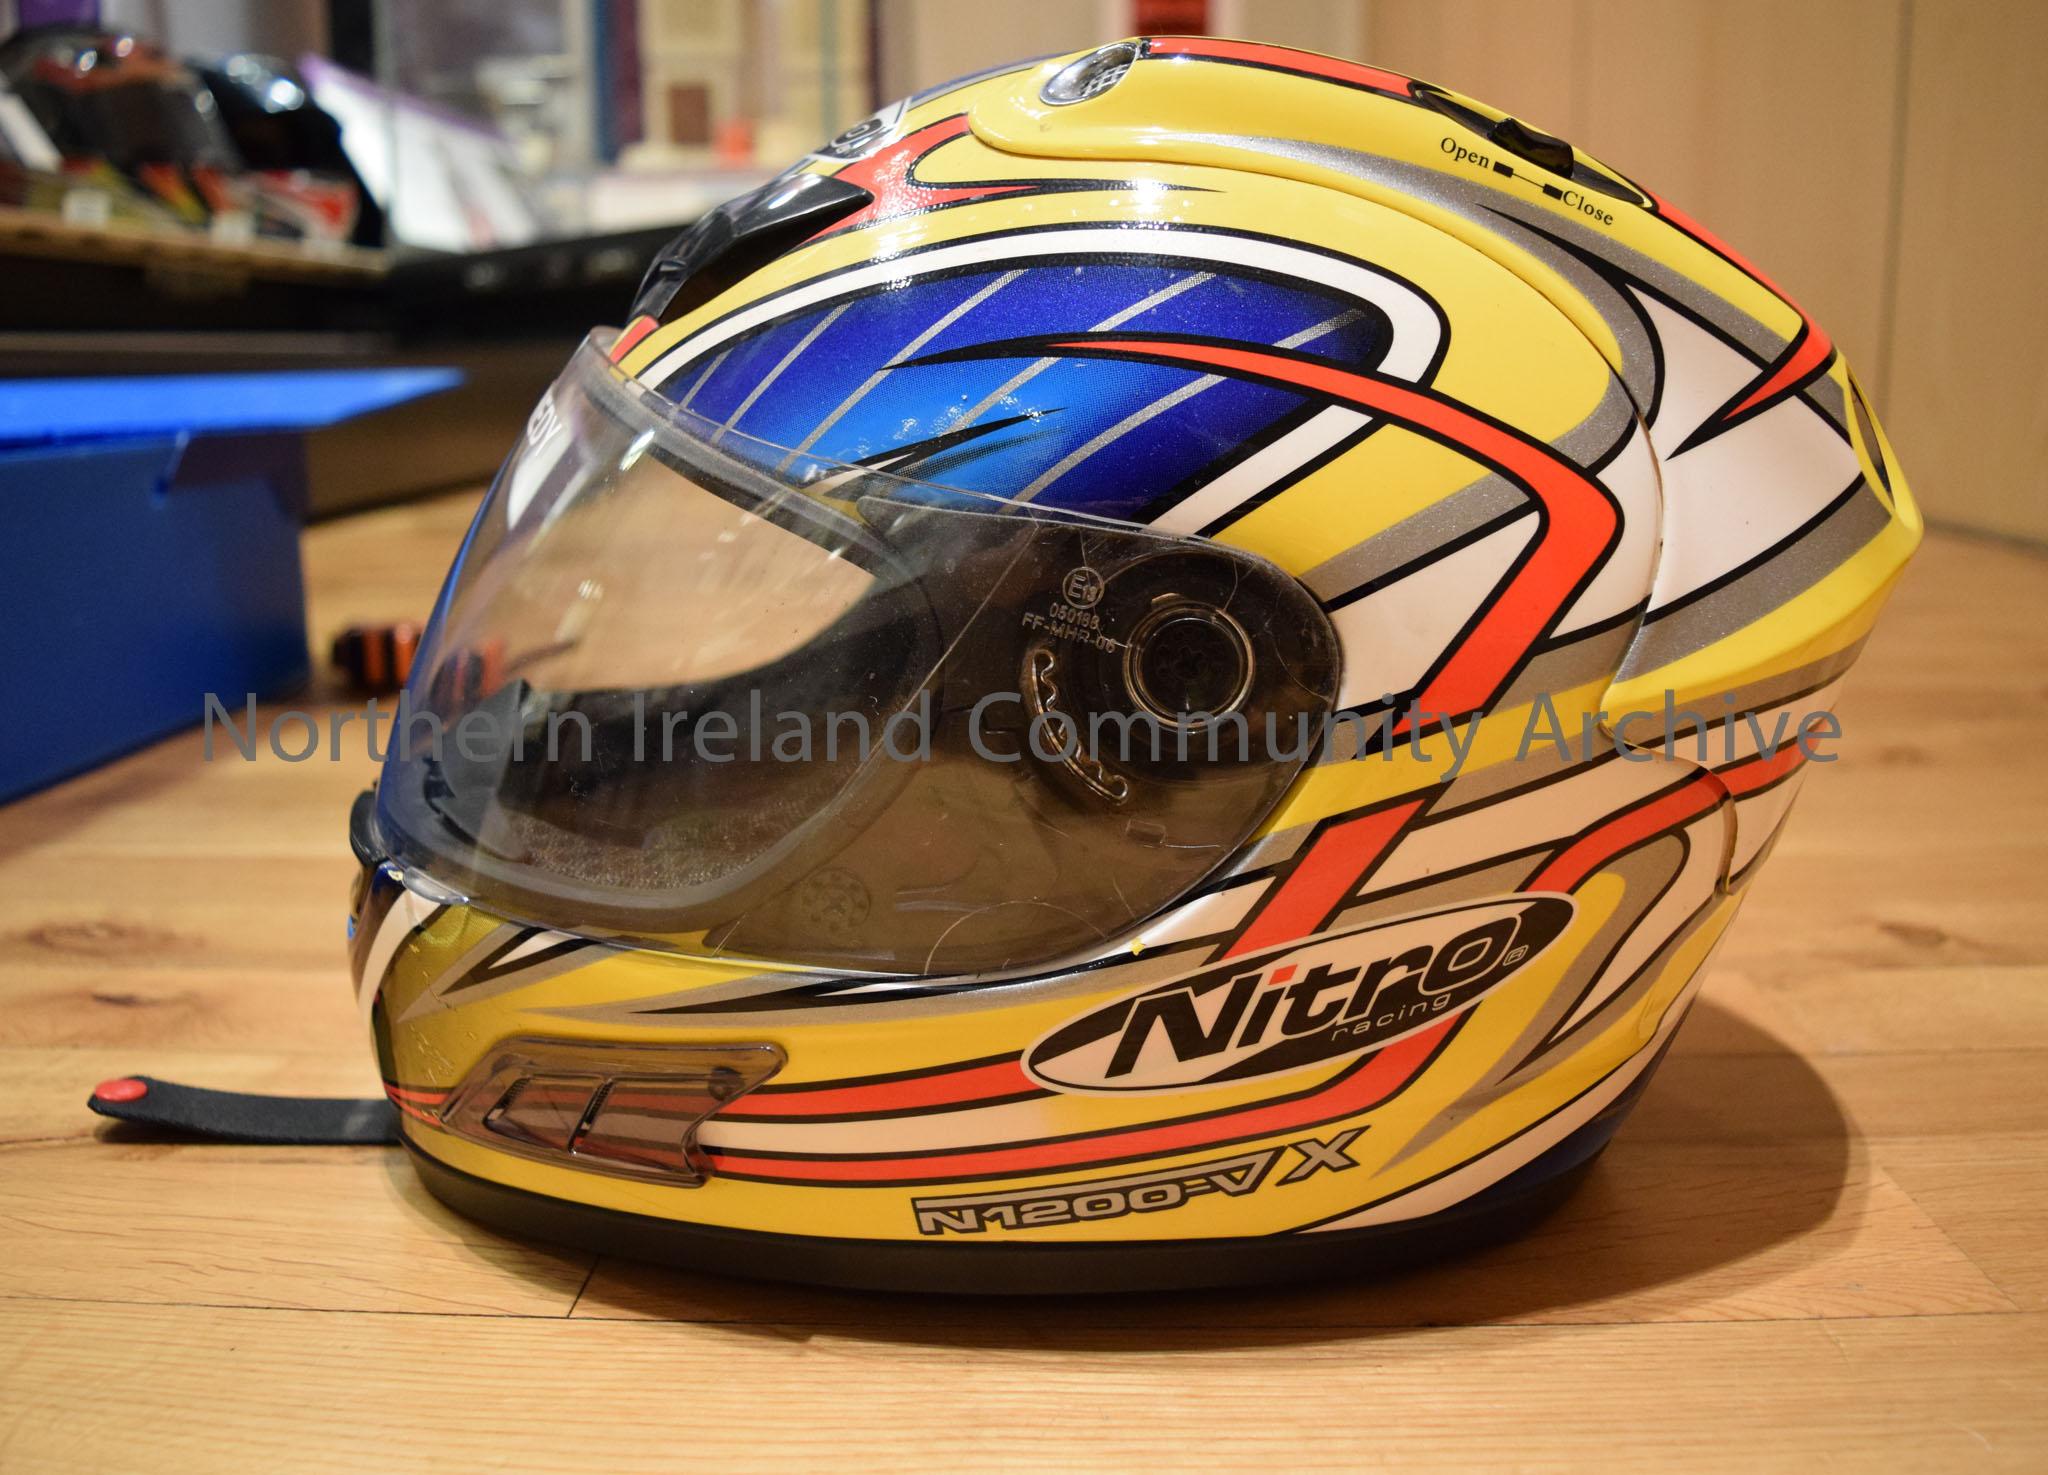 Nitro Racing motorcycle helmet belonging to Frank Kennedy. Yellow helmet with white, red and grey detail and dark blue and grey stripe pattern in the … – 2016.113 (3)